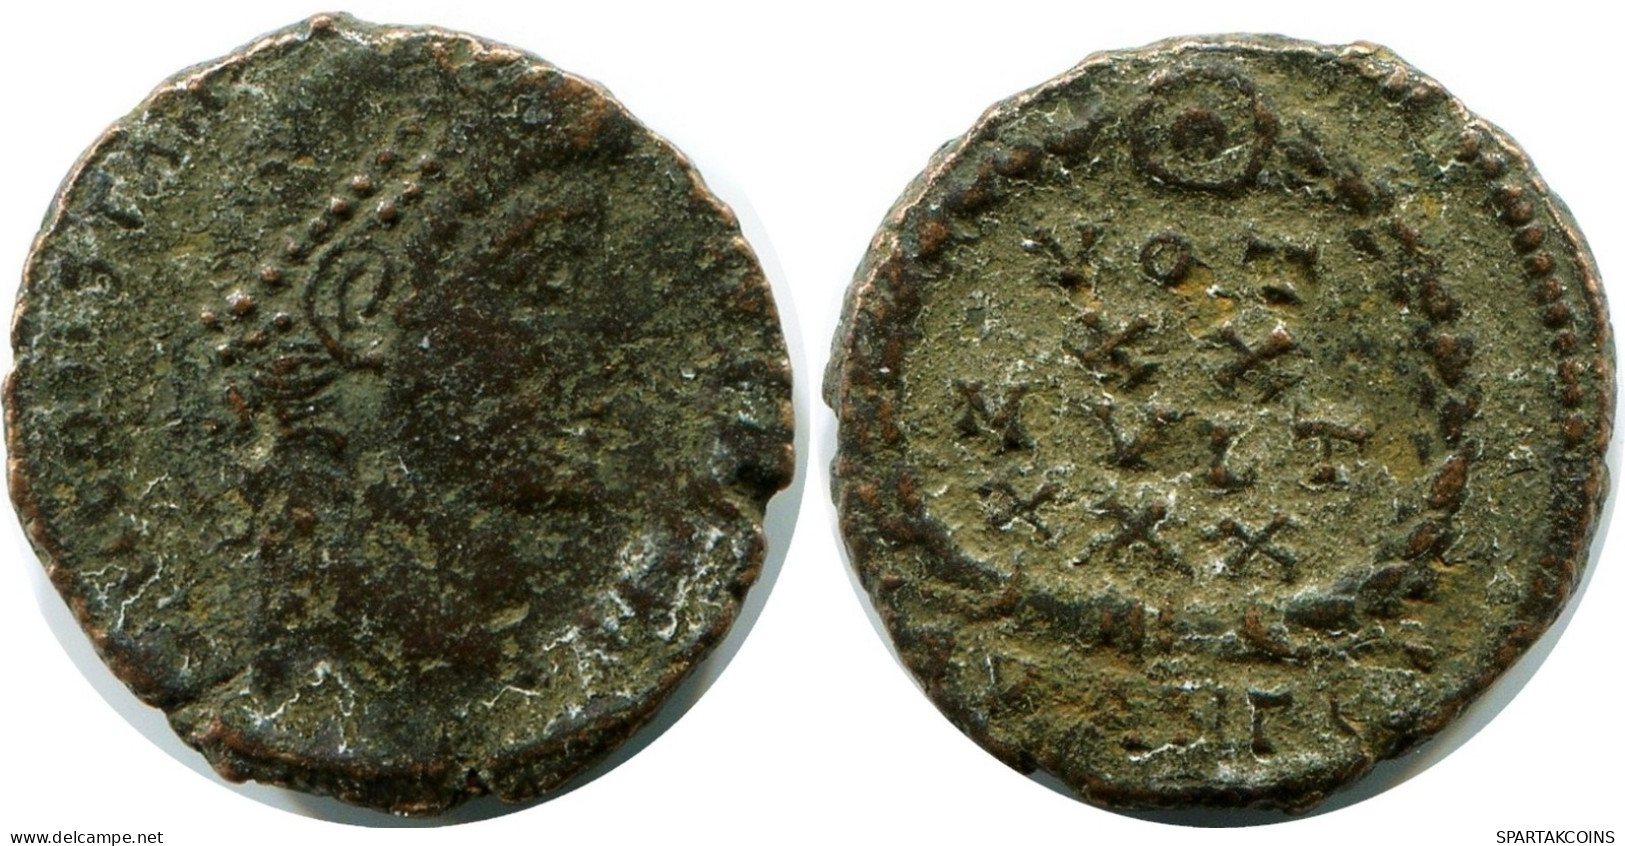 ROMAN Moneda MINTED IN ANTIOCH FOUND IN IHNASYAH HOARD EGYPT #ANC11300.14.E.A - El Impero Christiano (307 / 363)